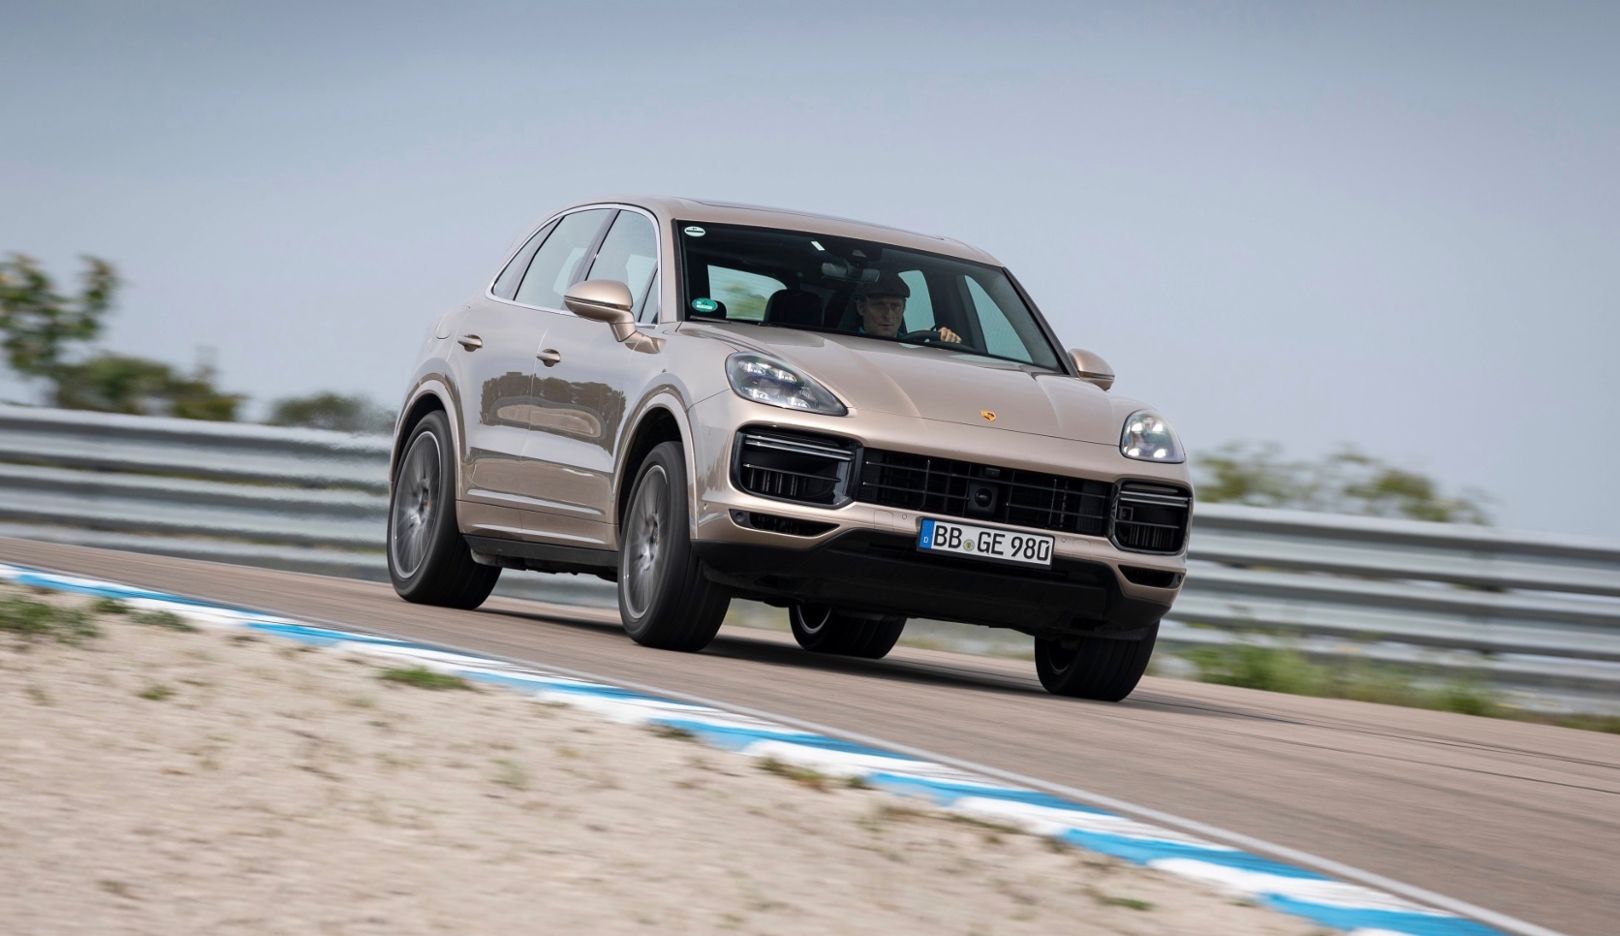 The Cayenne Turbo S E-Hybrid sets an unusual lap record